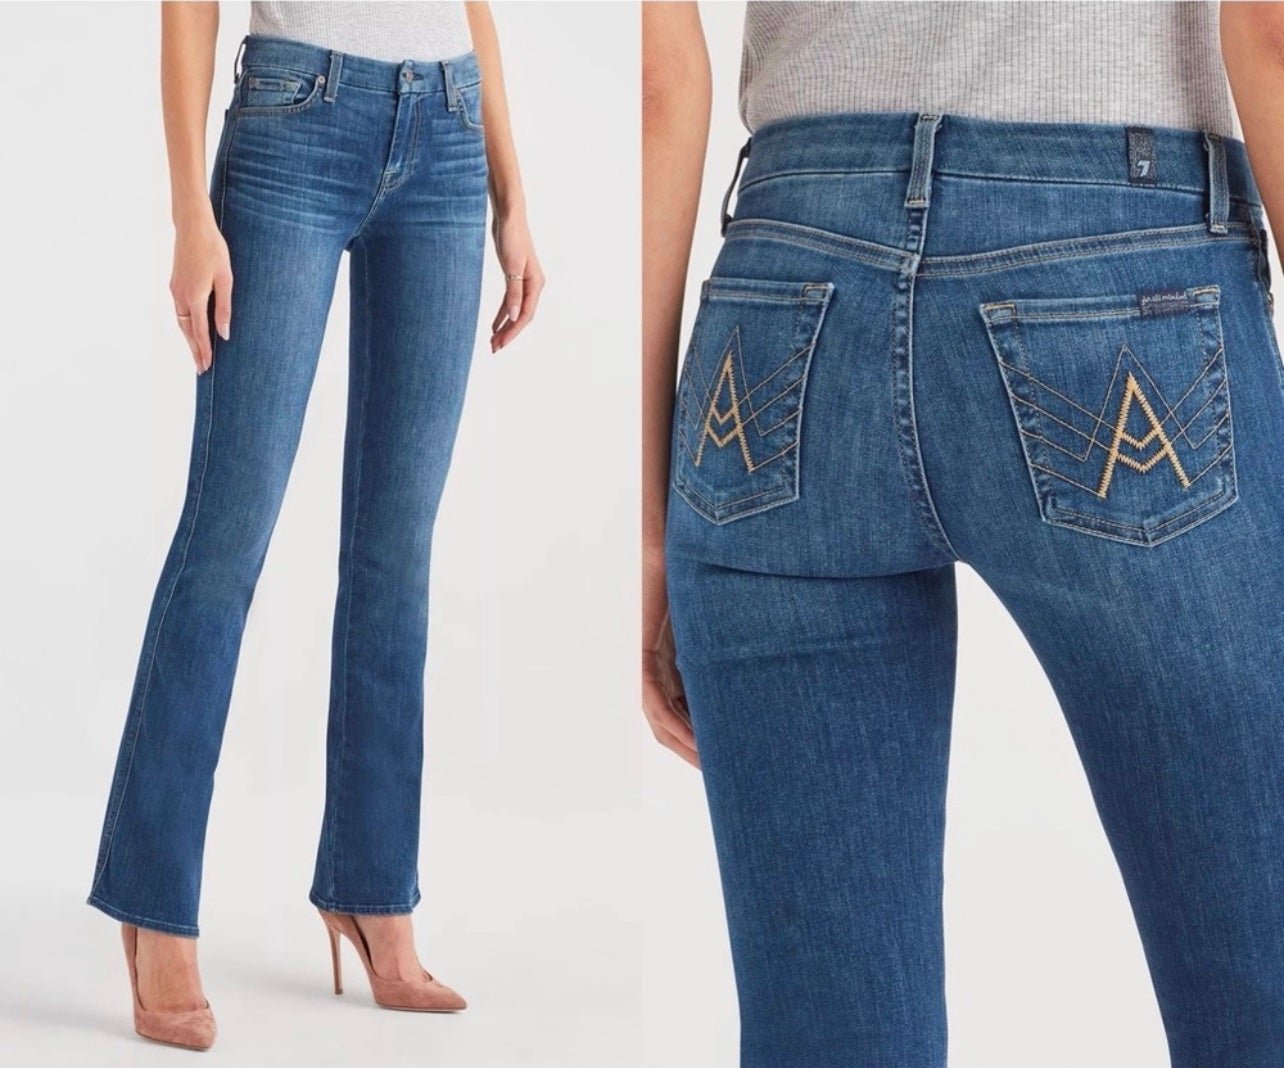 Elegant 7 for All Mankind A Pocket Flare Jeans in Anthem Blue Size 26 HhqJyit8Y just for you